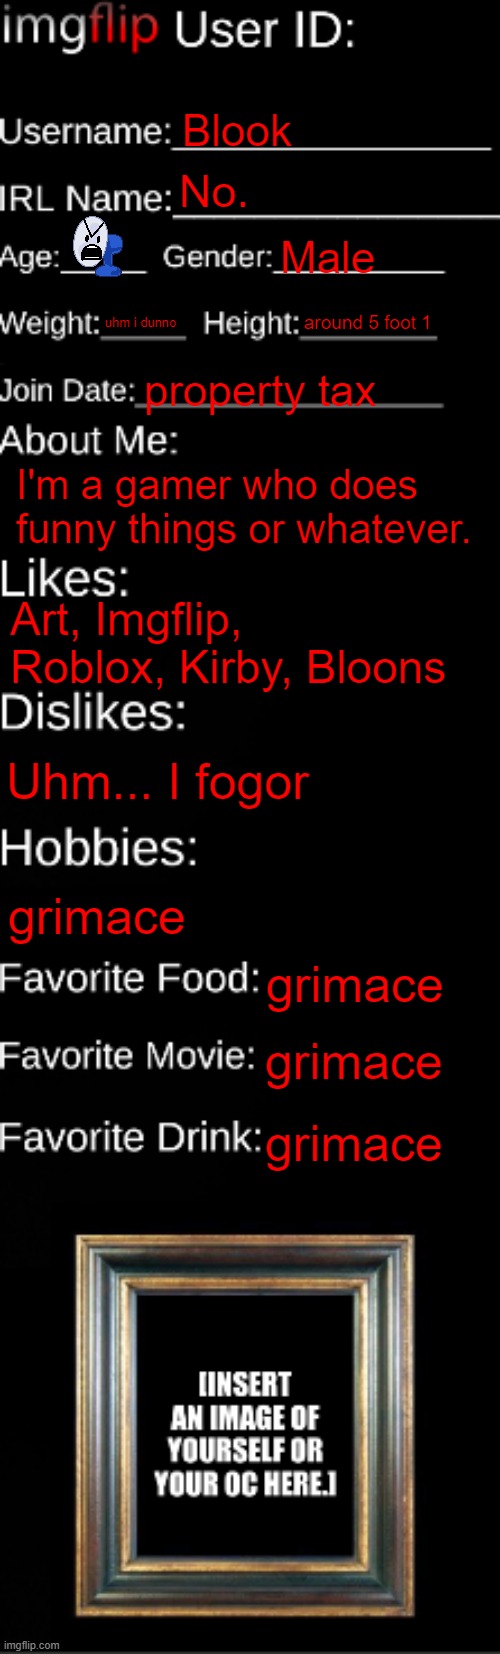 imgflip ID Card | Blook; No. Male; uhm i dunno; around 5 foot 1; property tax; I'm a gamer who does funny things or whatever. Art, Imgflip, Roblox, Kirby, Bloons; Uhm... I fogor; grimace; grimace; grimace; grimace | image tagged in imgflip id card | made w/ Imgflip meme maker